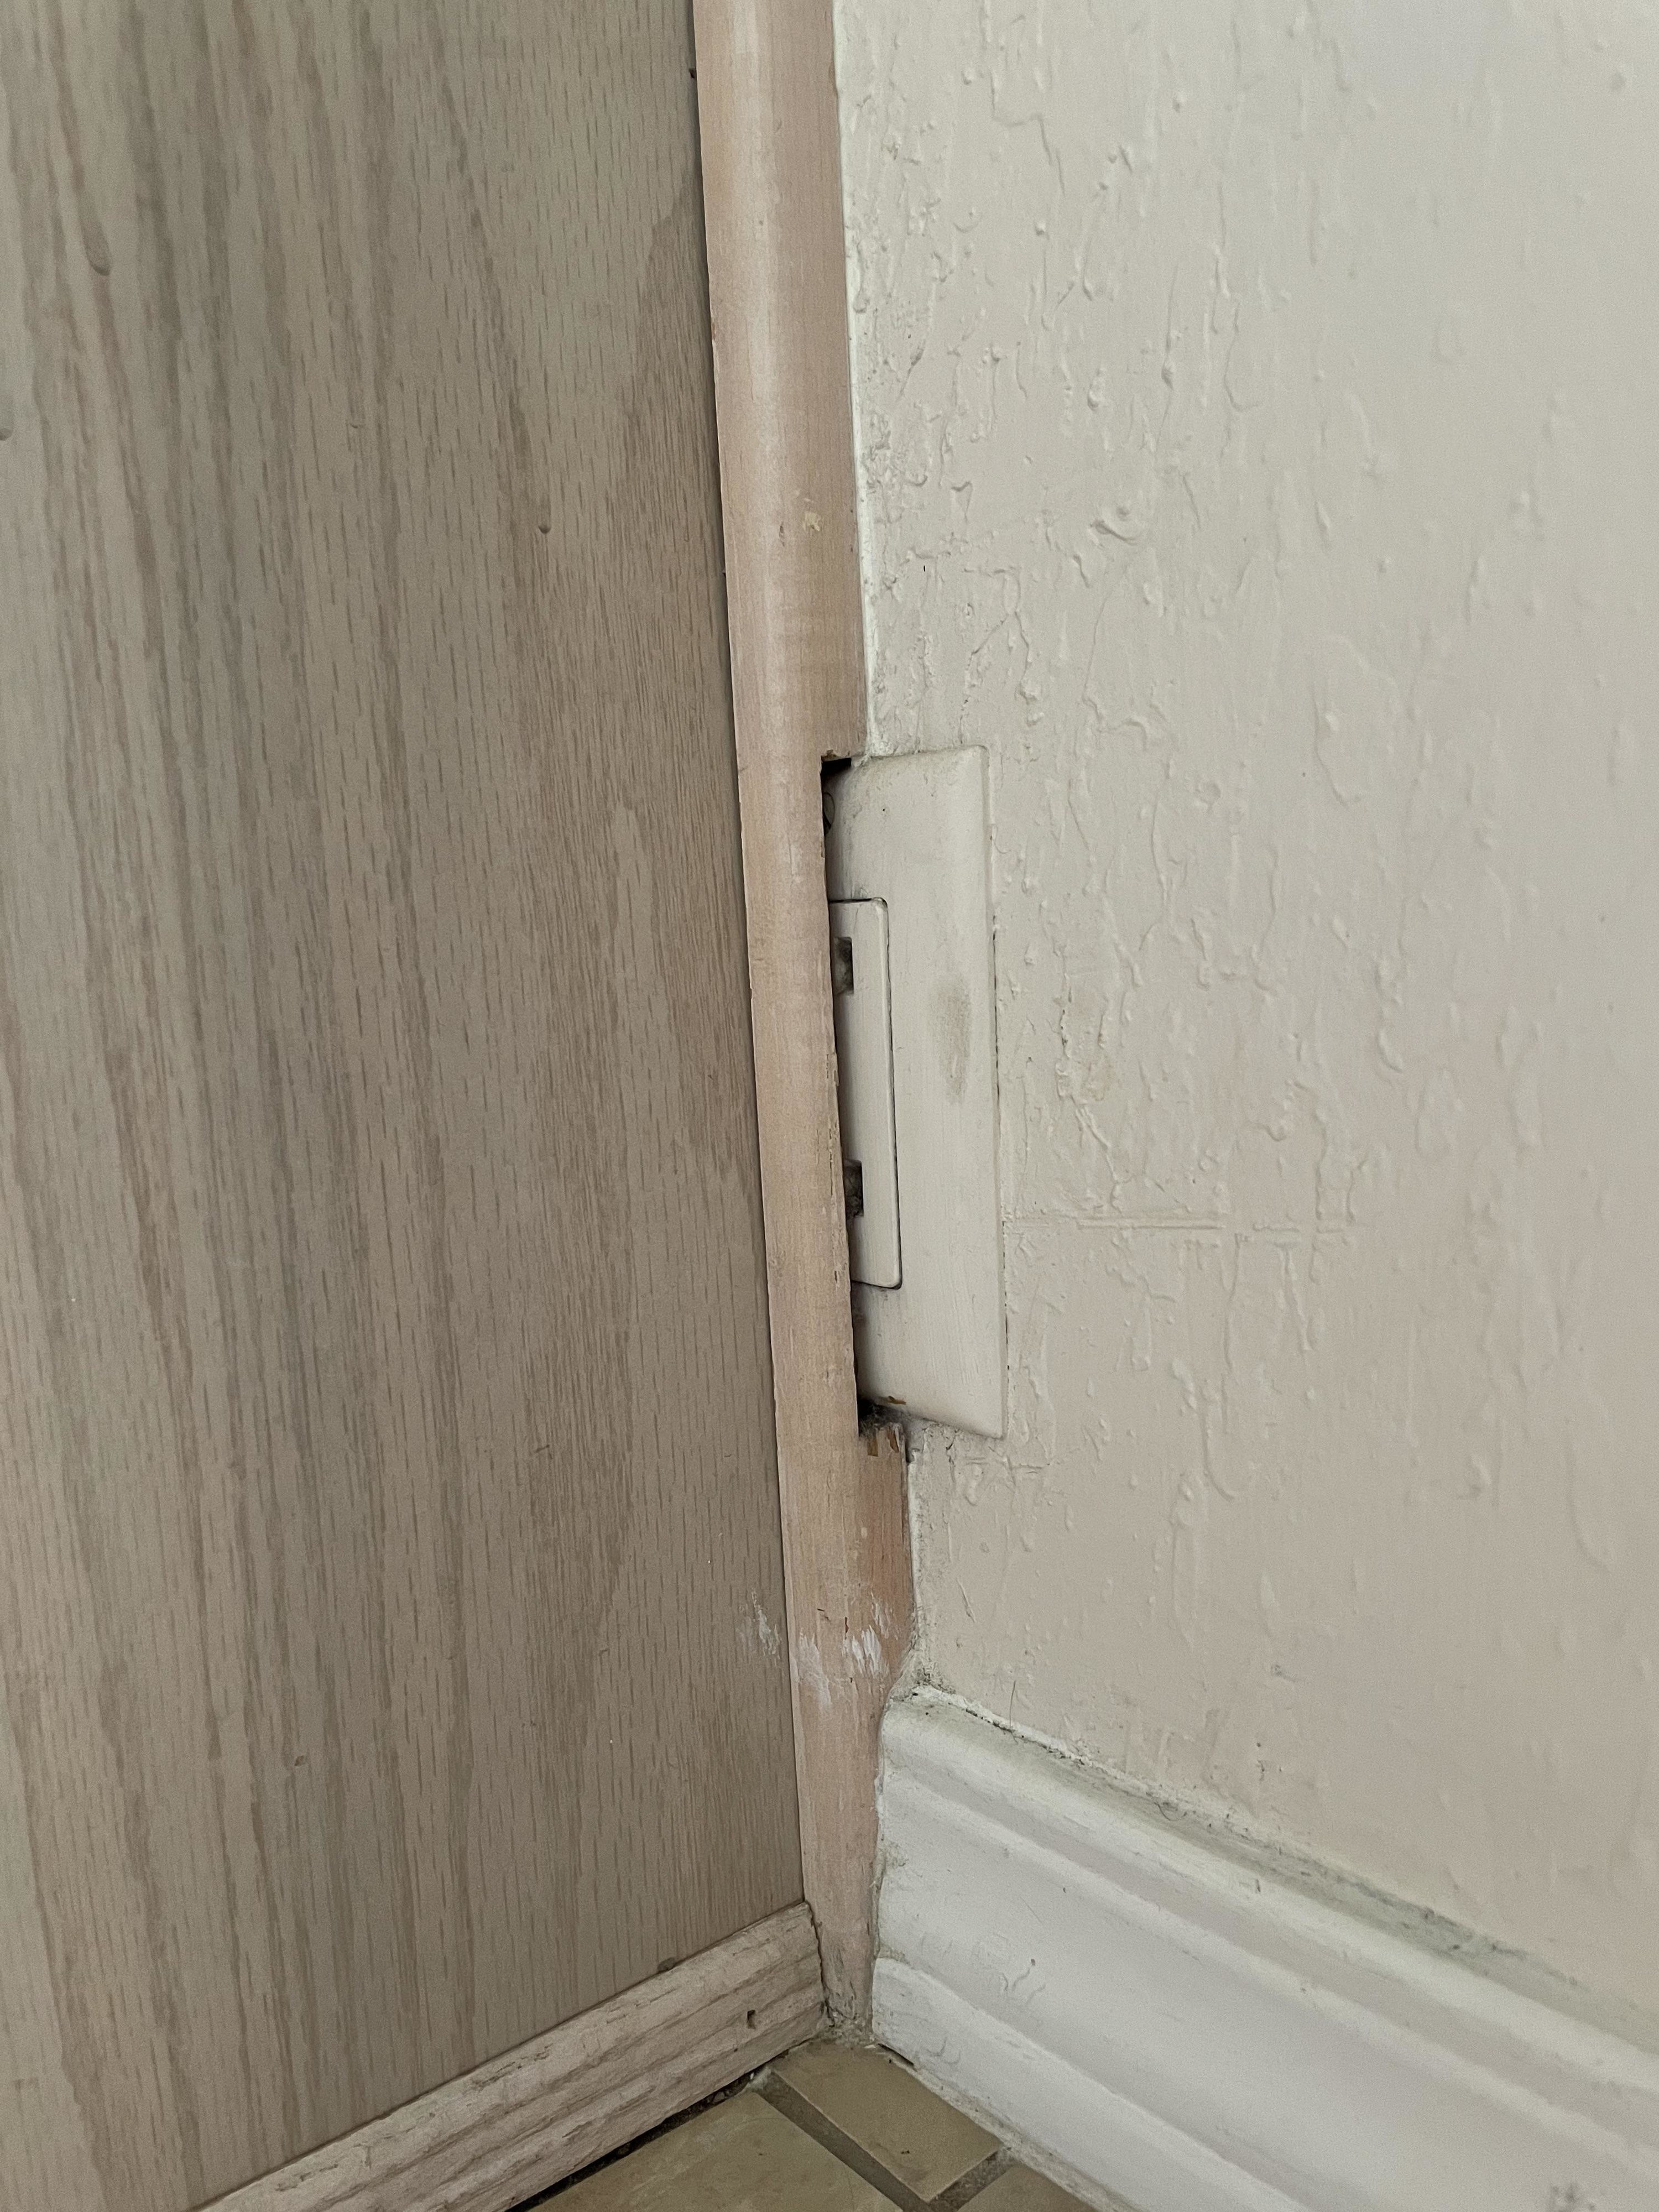 outlet that&#x27;s half-covered by a wall